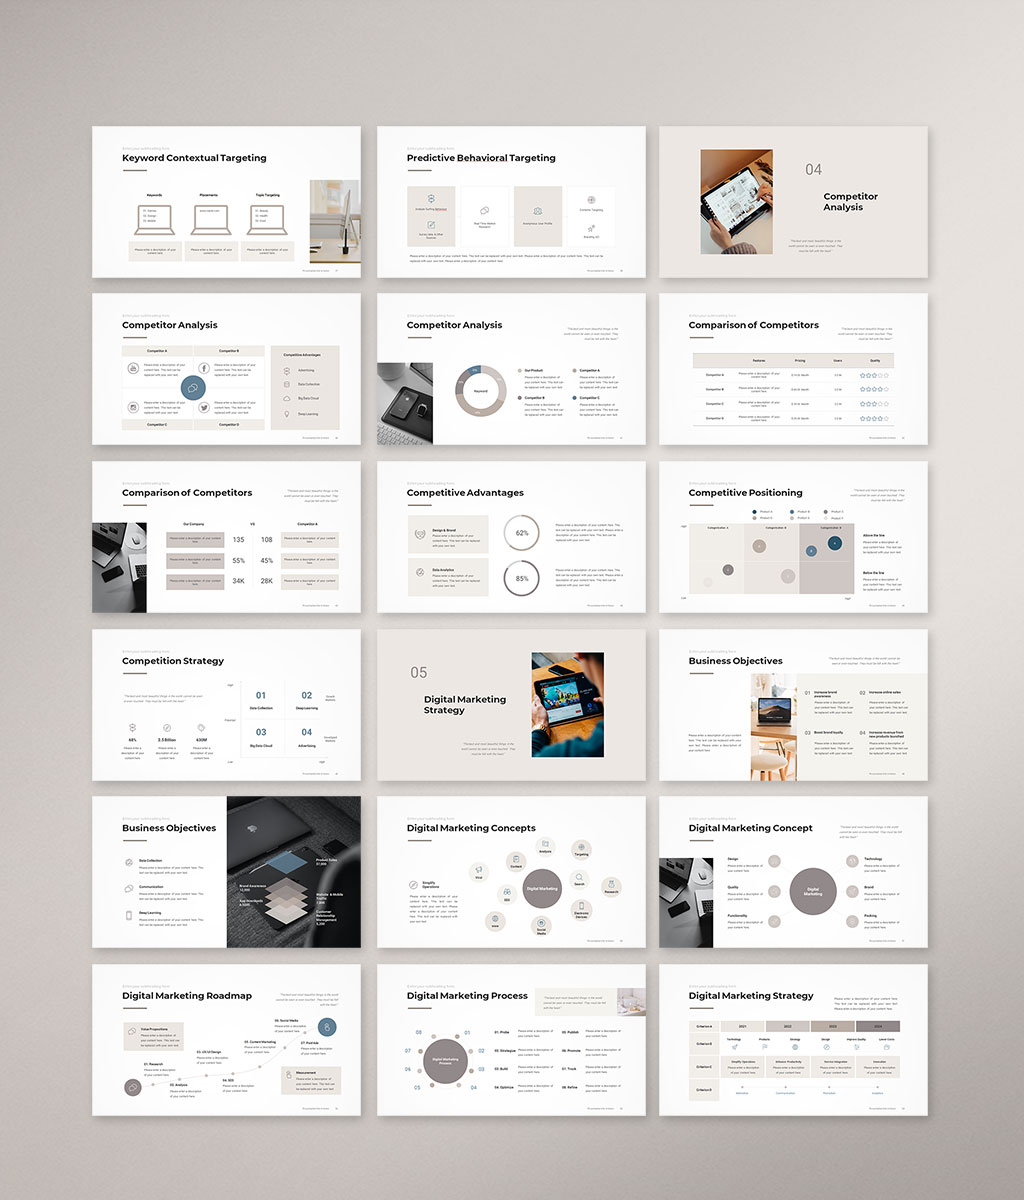 Digital Marketing Strategy Preview preview 003